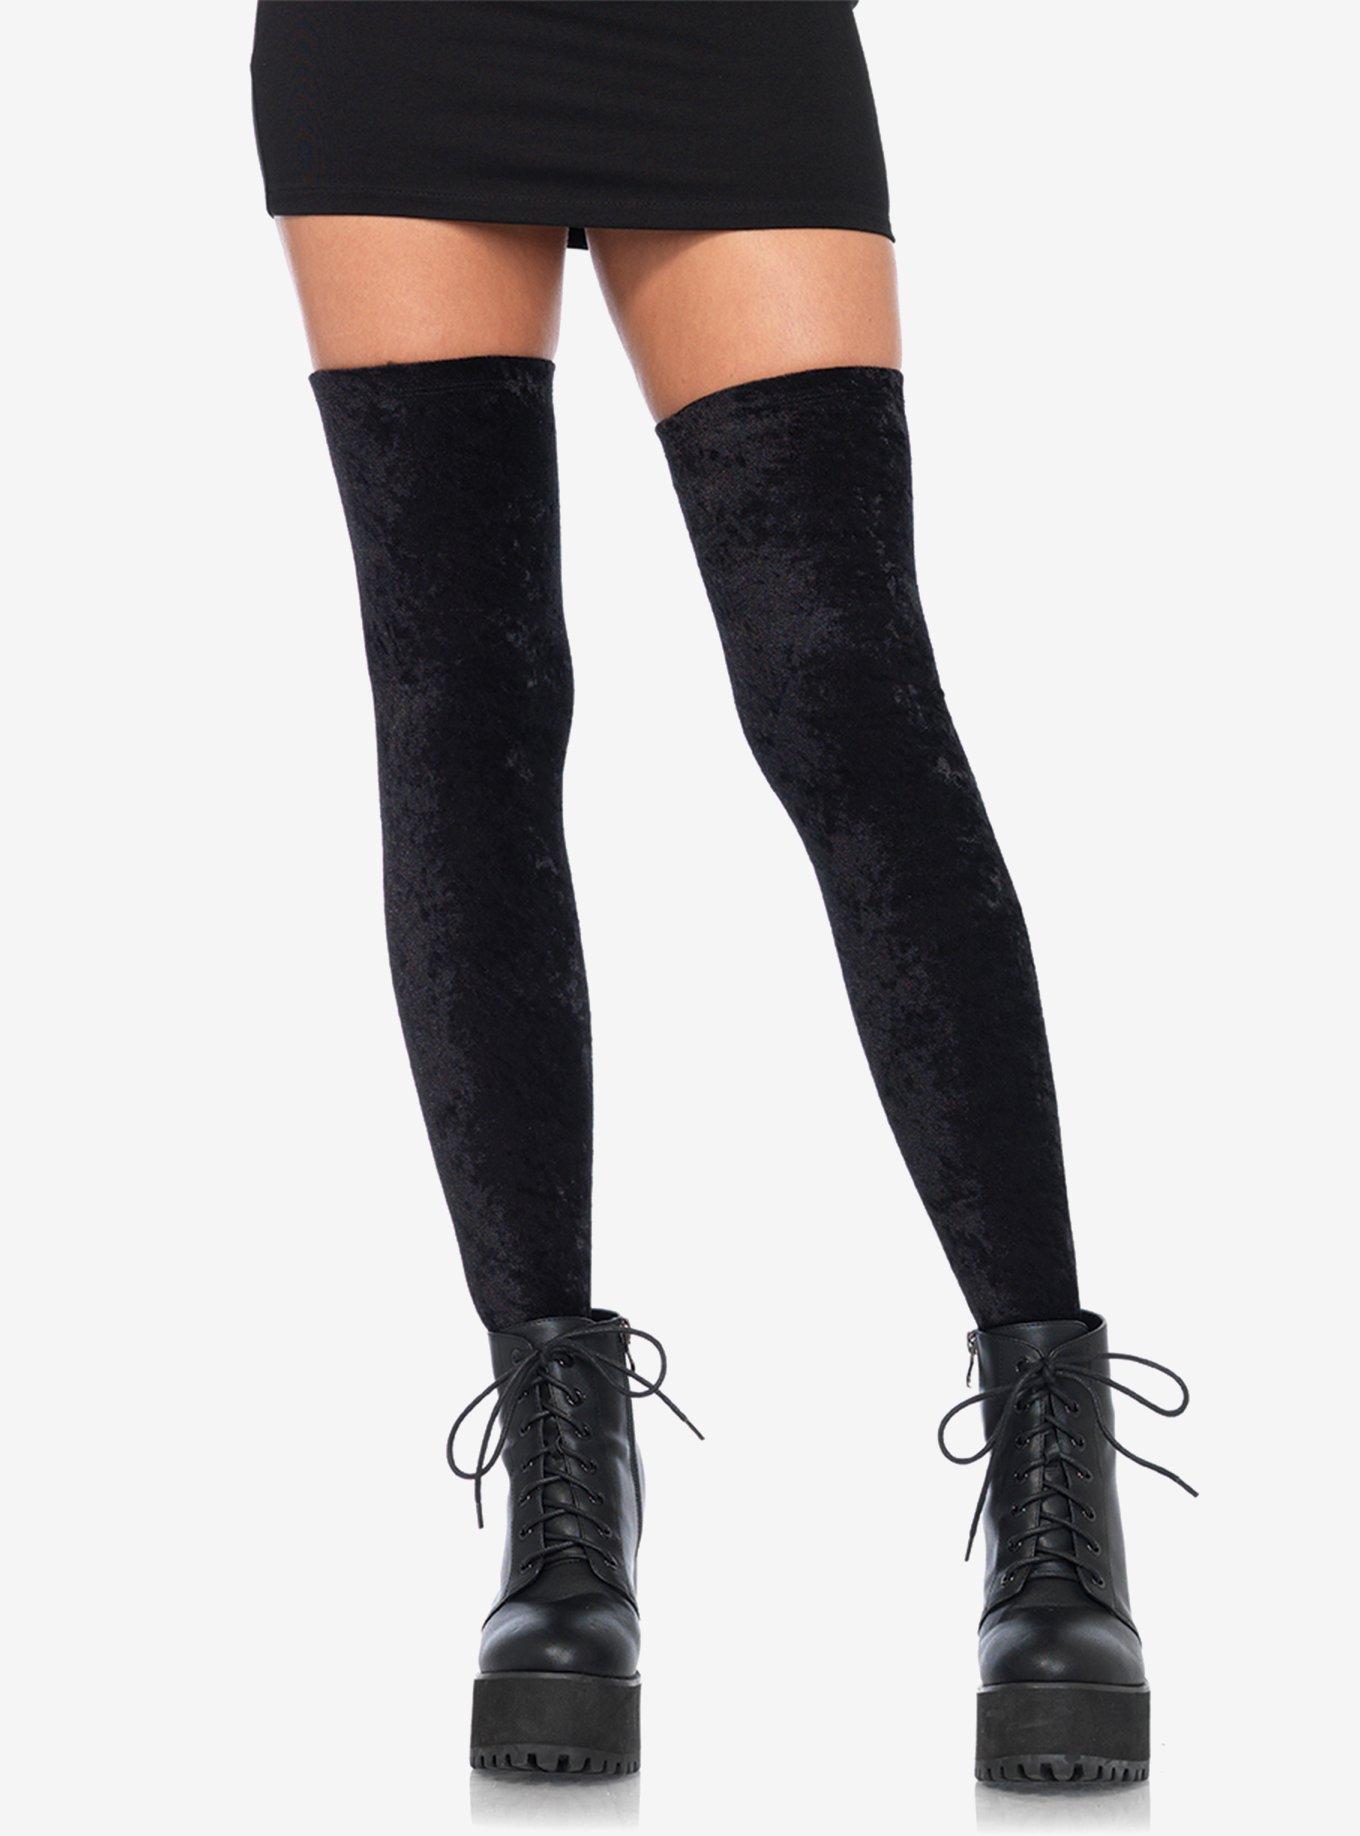 Black Floral Lace Thigh Highs, Hot Topic